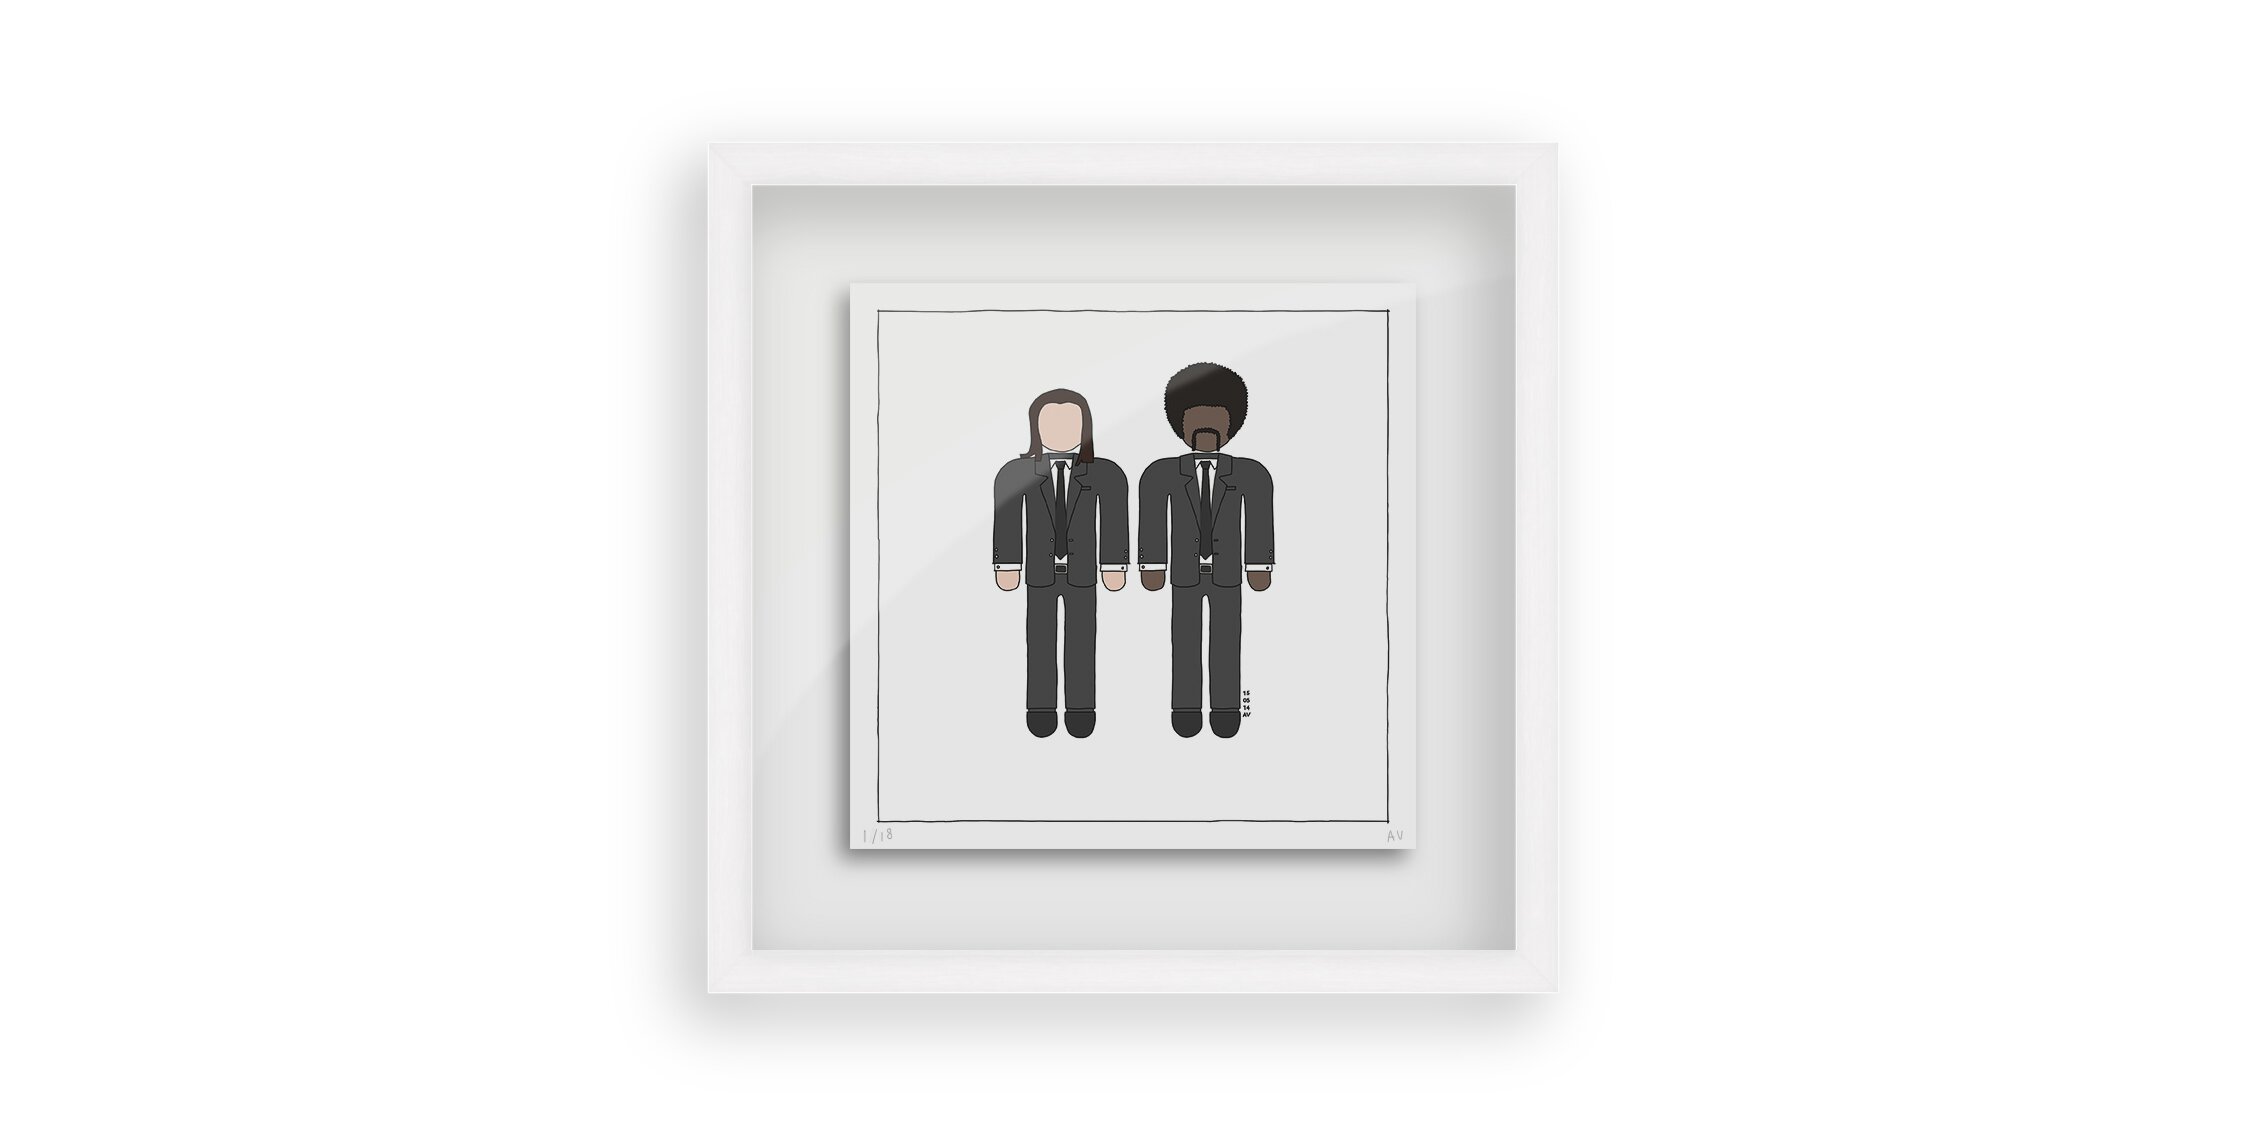 Pulp Fiction Vincent Vega and Jules Winnfield - Persona Art Project (Ant Vervoort Hand Drawing)